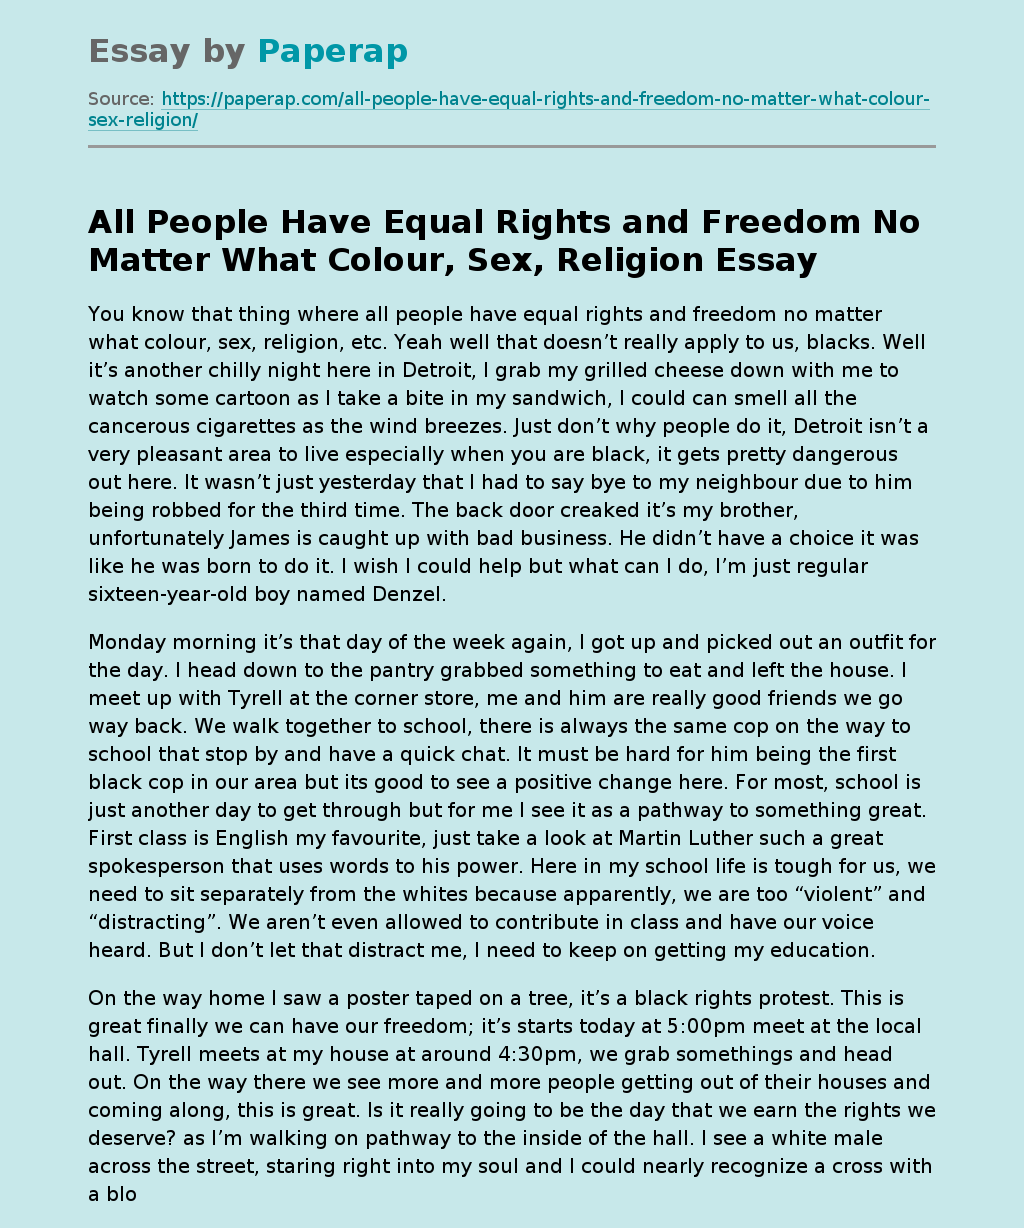 All People Have Equal Rights and Freedom No Matter What Colour, Sex, Religion